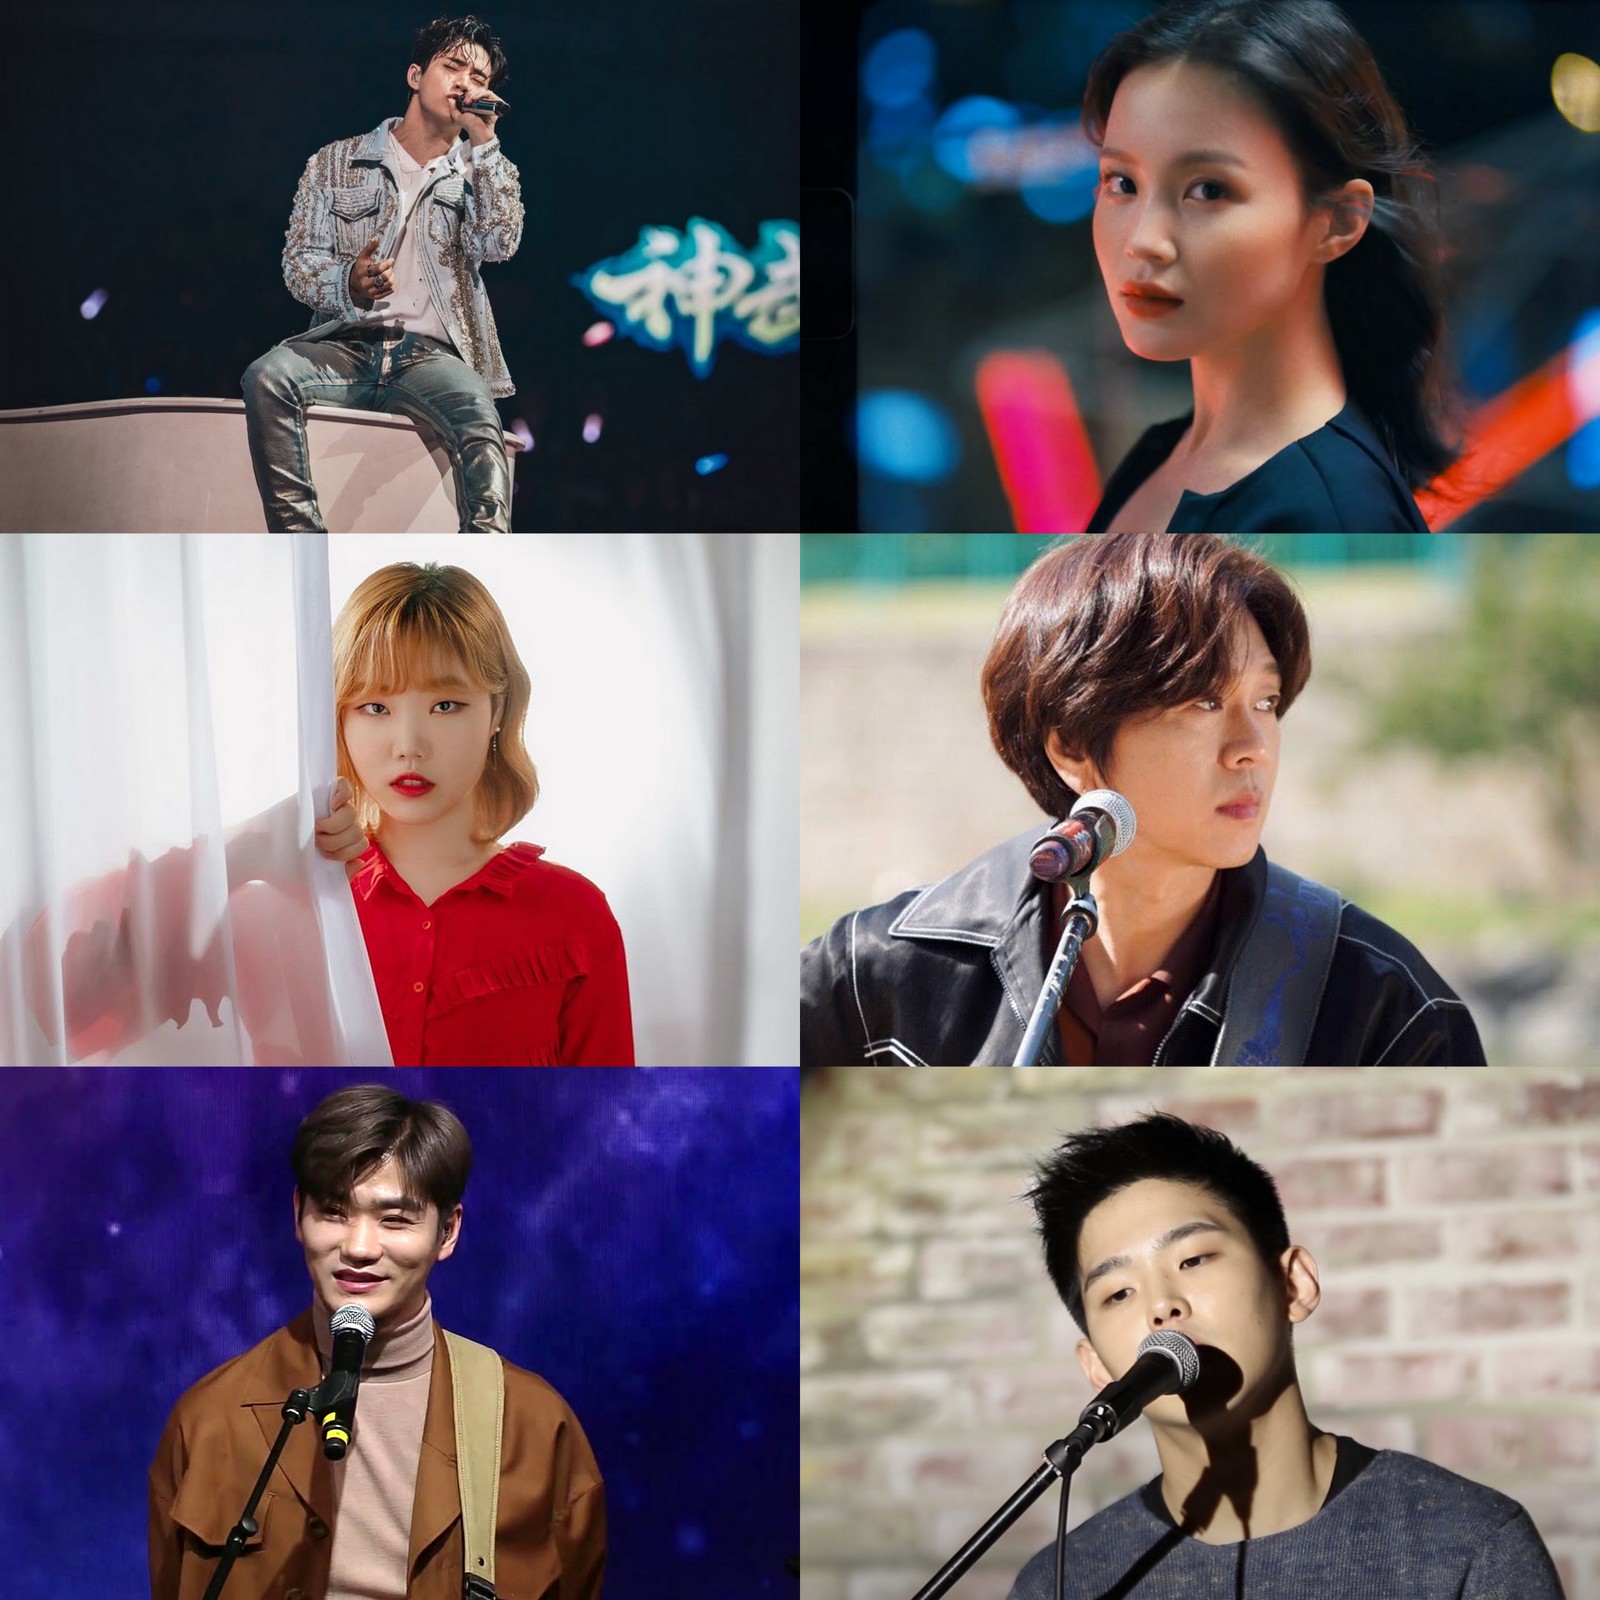 henry-akmu-suhyun-paul-kim-and-more-to-return-with-begin-again-reunion-in-december